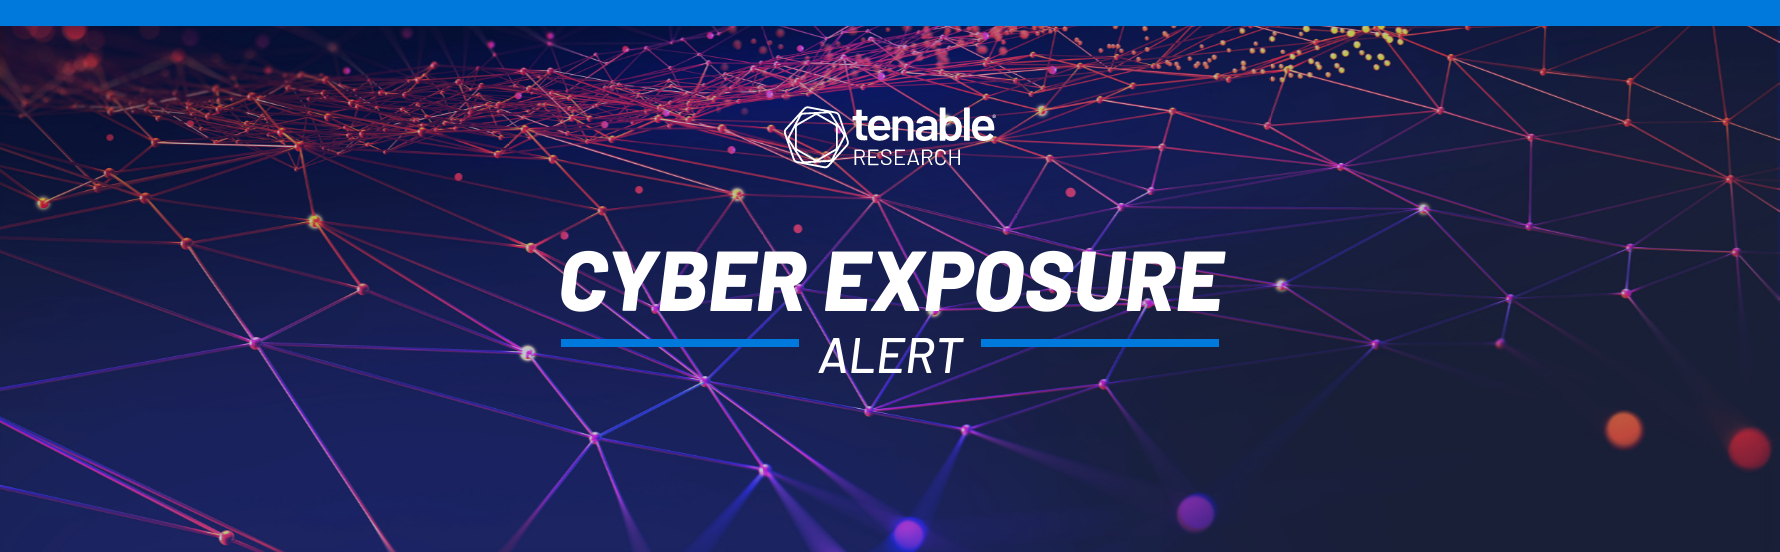 Tenable Cyber Exposure Alert for New Joint Cybersecurity Advisory AA22-257A